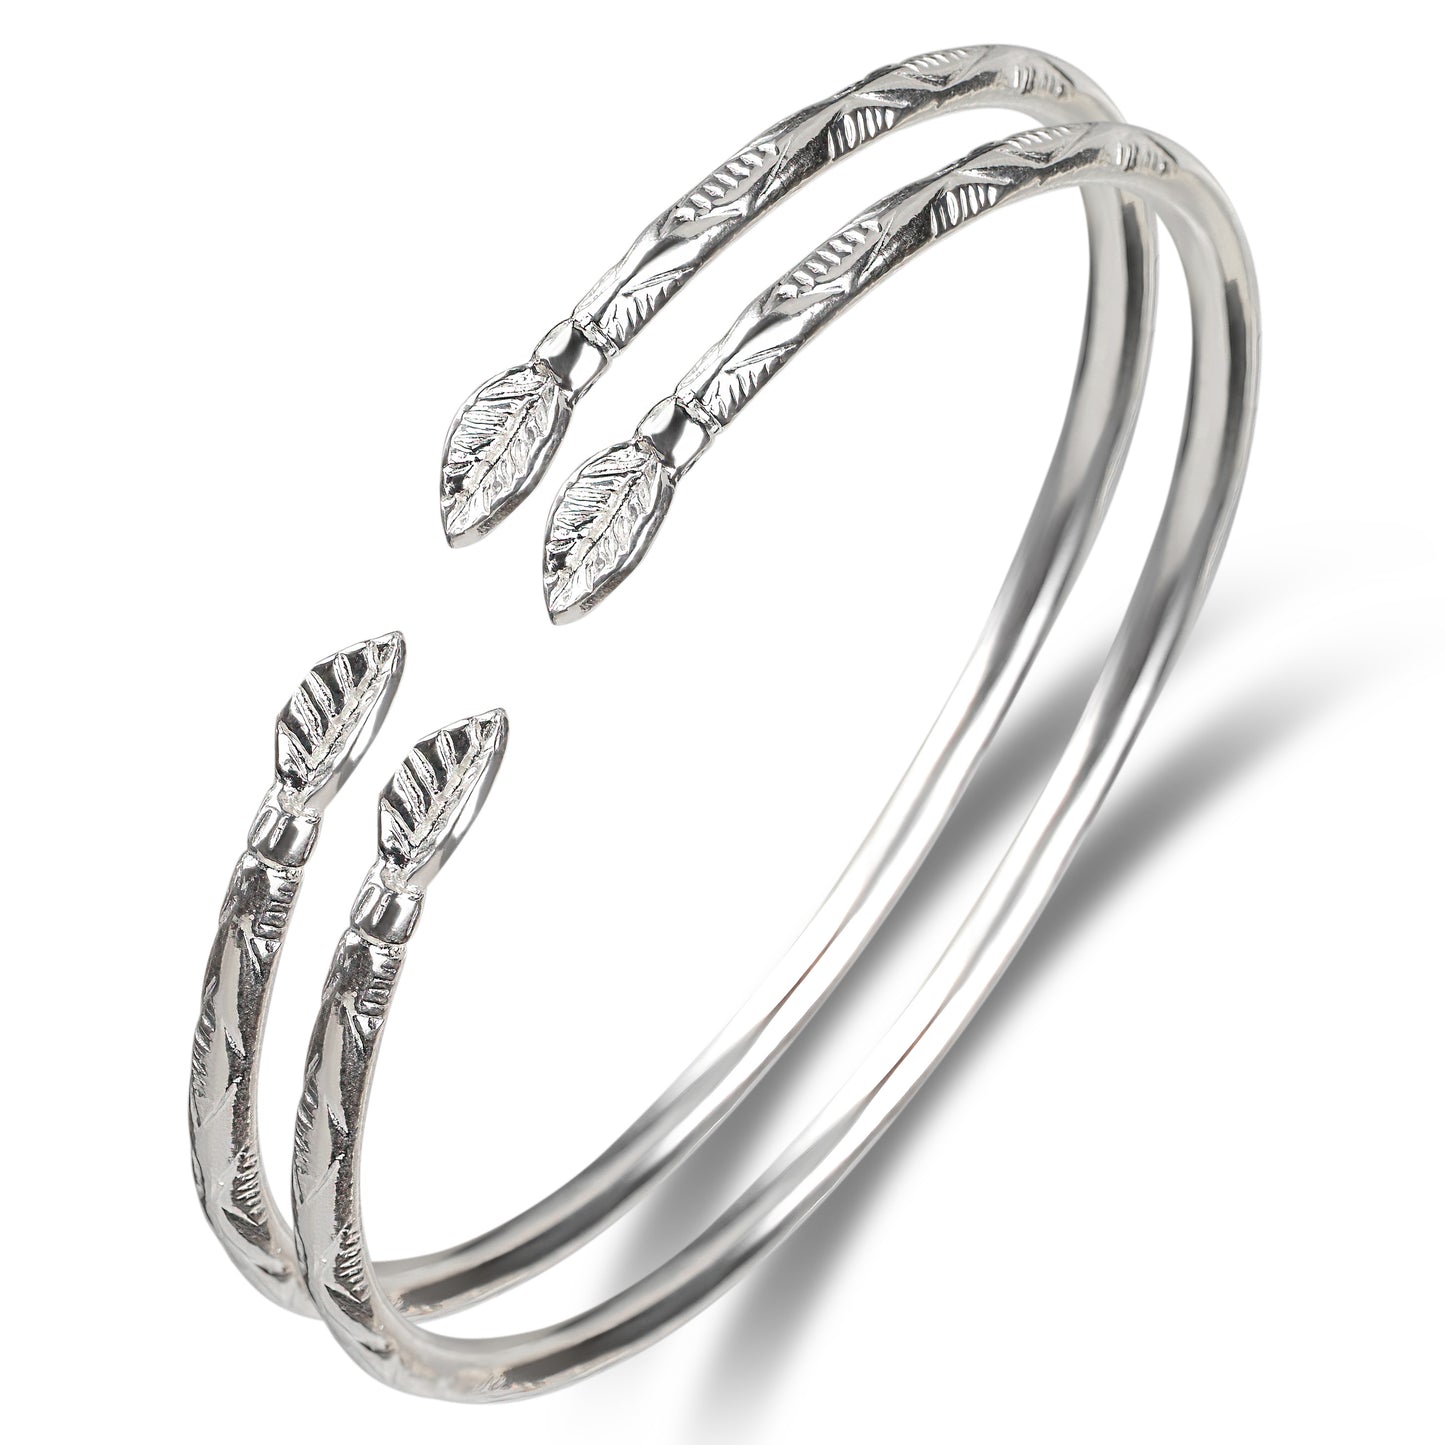 Better Jewelry Leaf .925 Sterling Silver West Indian Bangles (Pair)